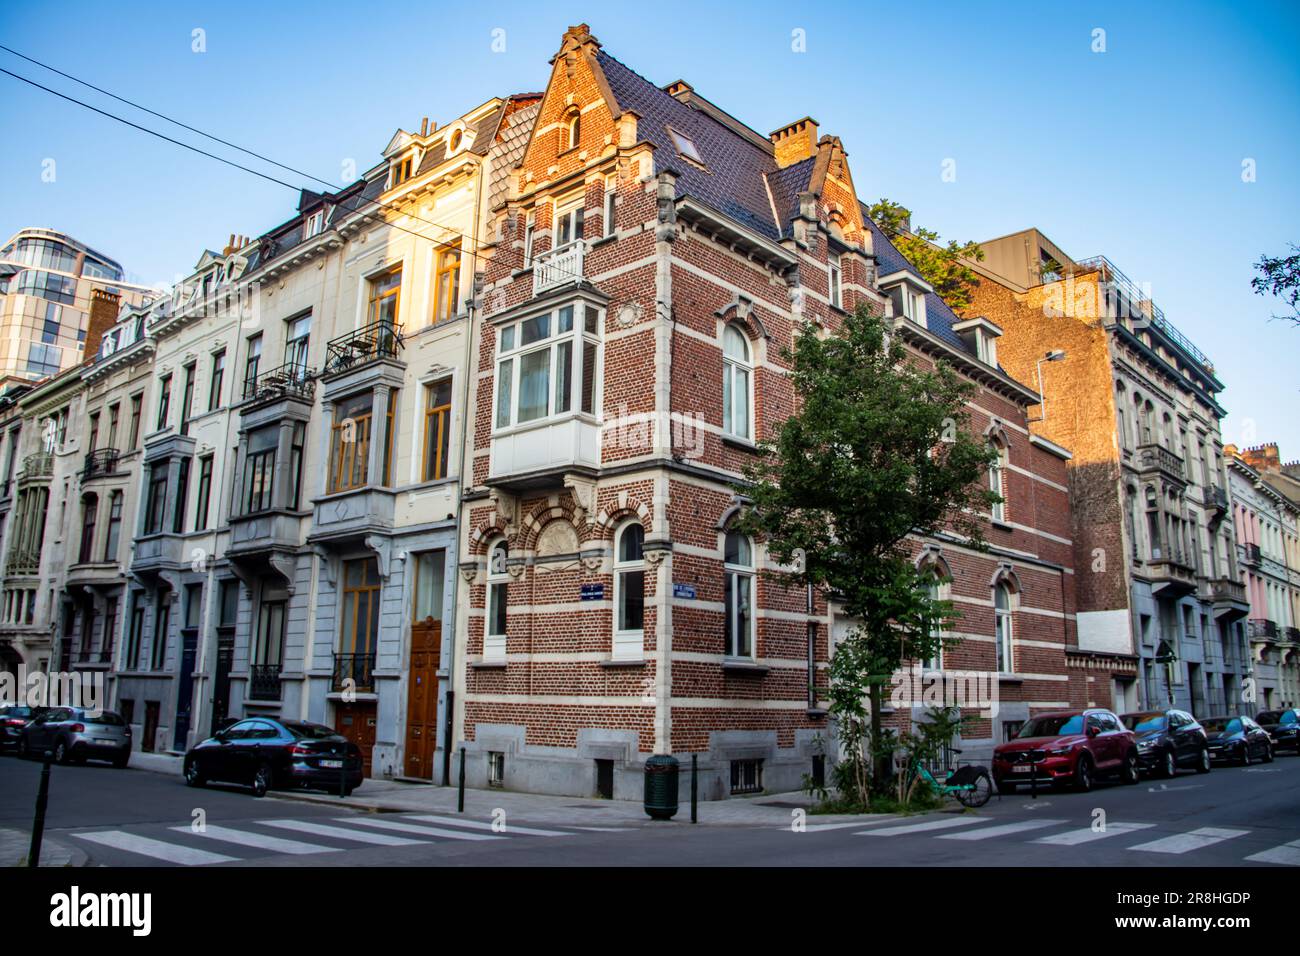 Brussels architecture showcases a captivating blend of styles, from Gothic to Art Nouveau. Grand palaces, ornate facades, and stunning landmarks Stock Photo